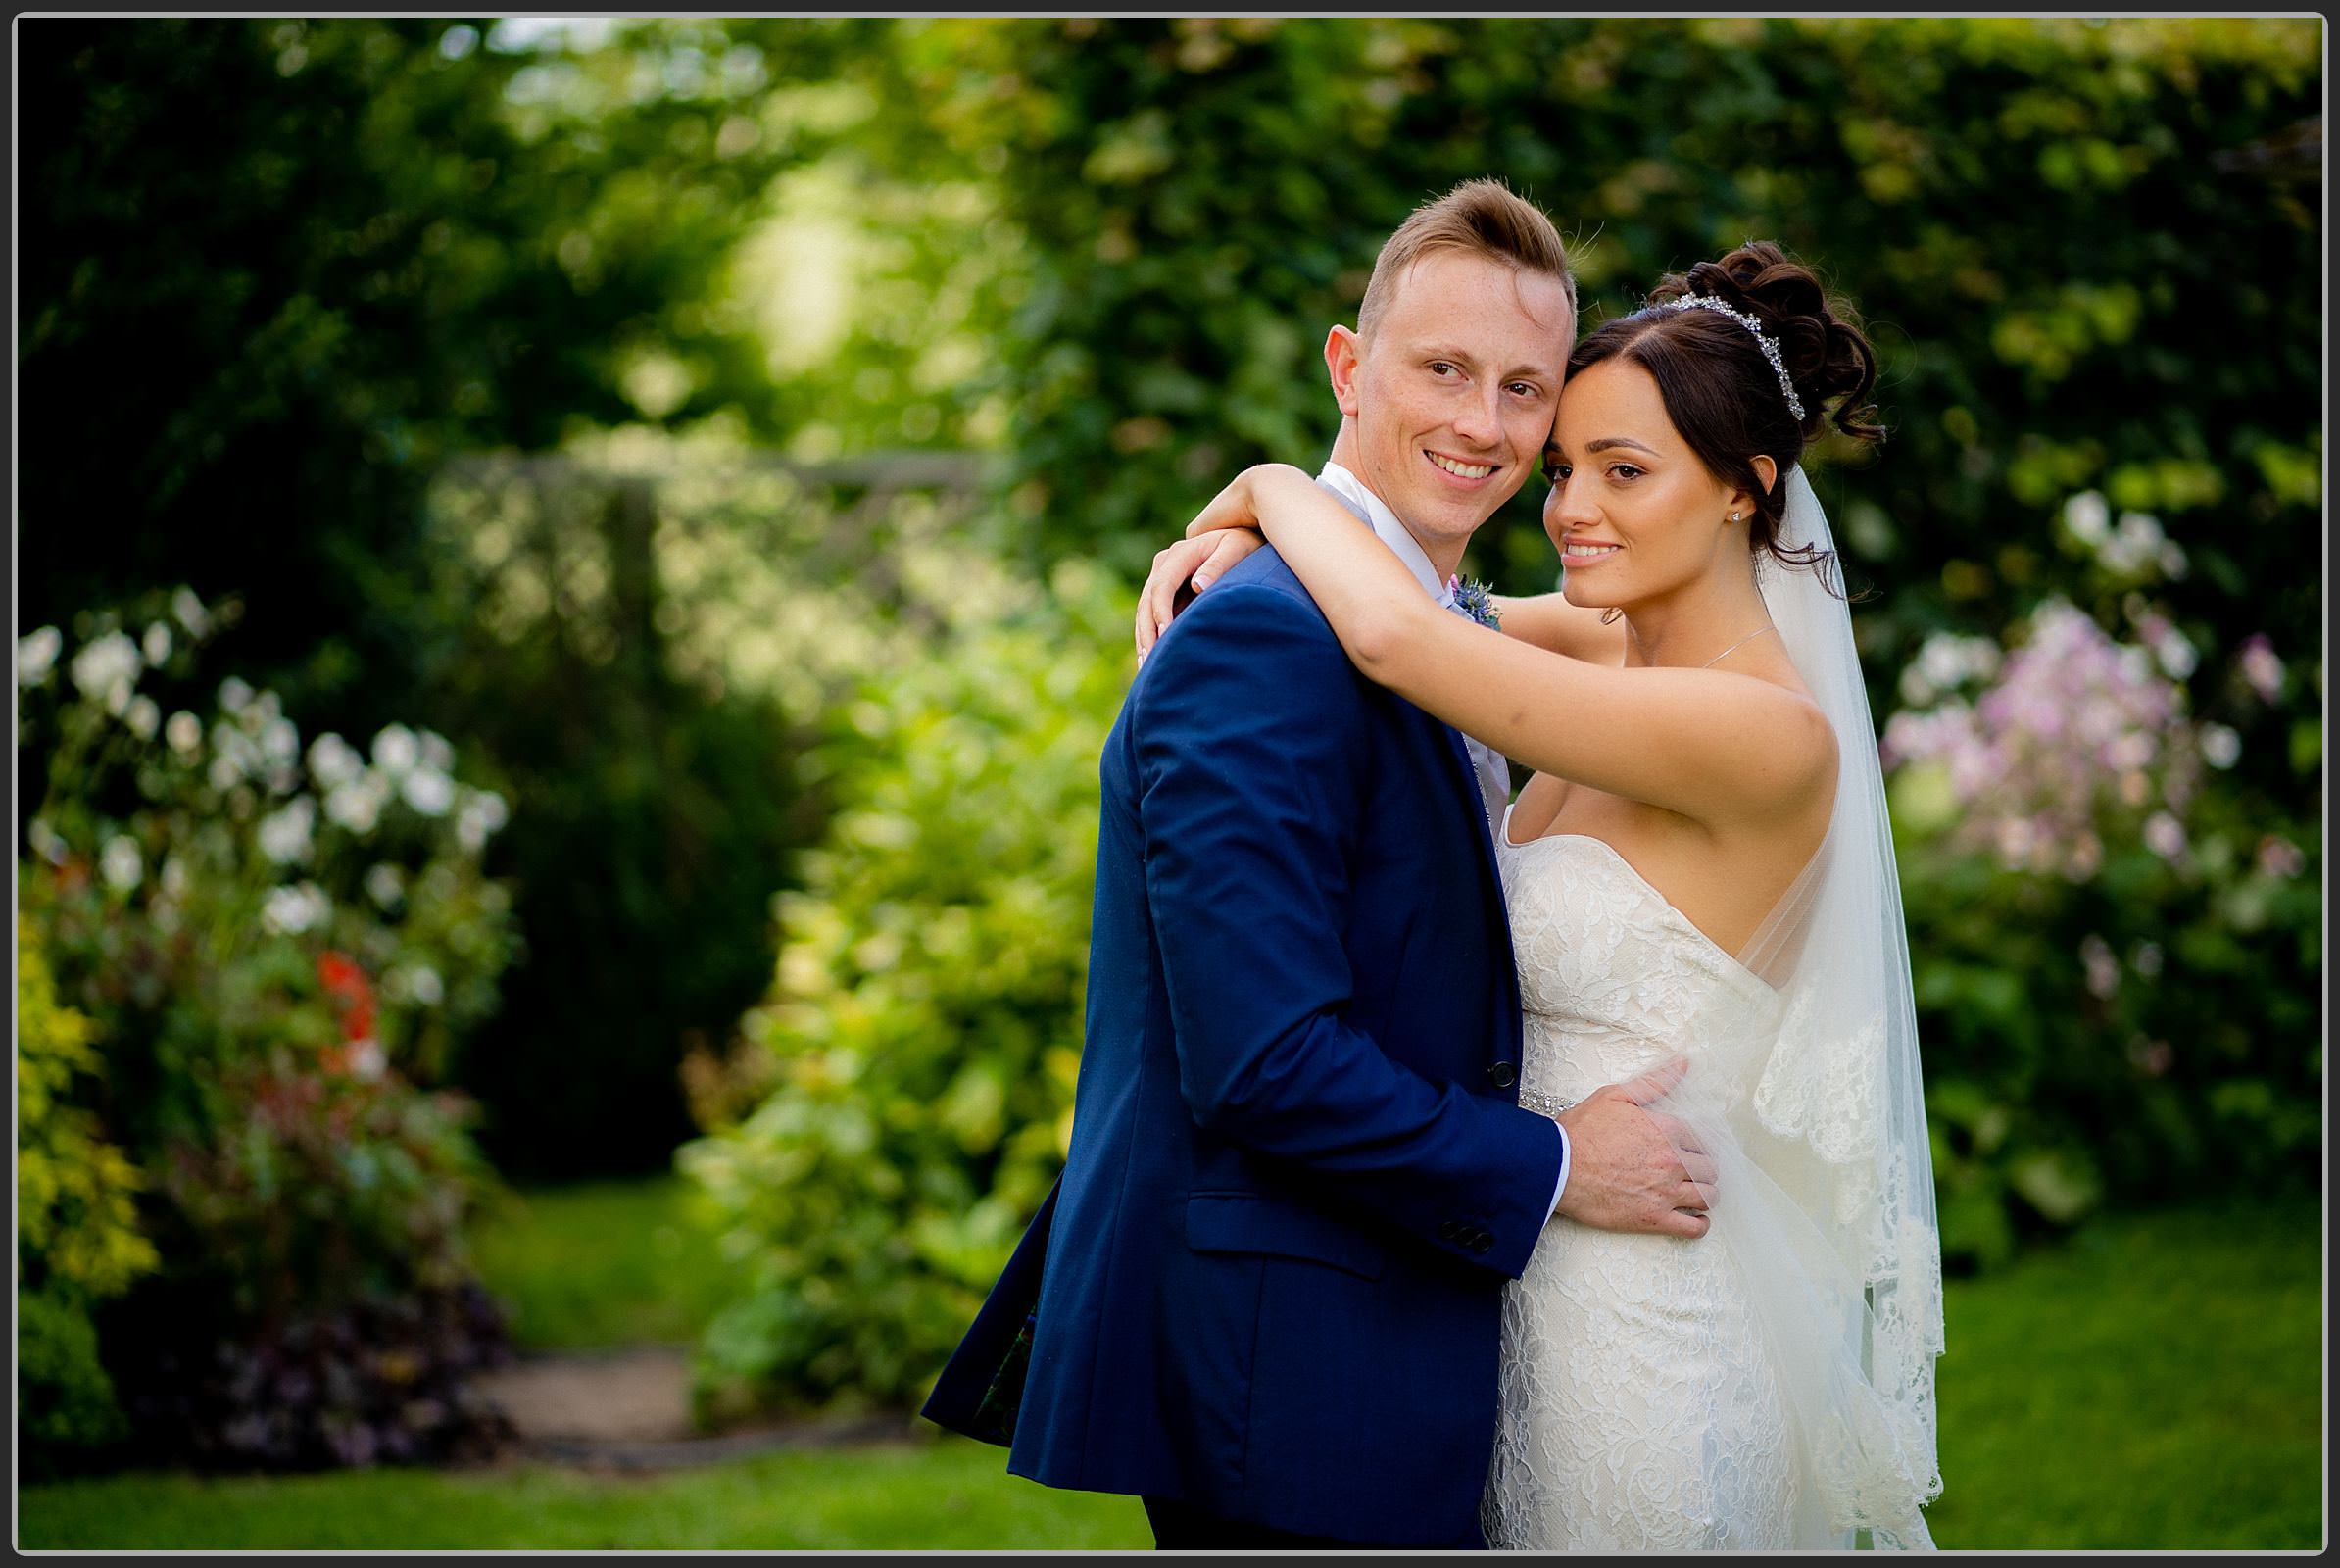 The Bride and Groom together at Warwick House